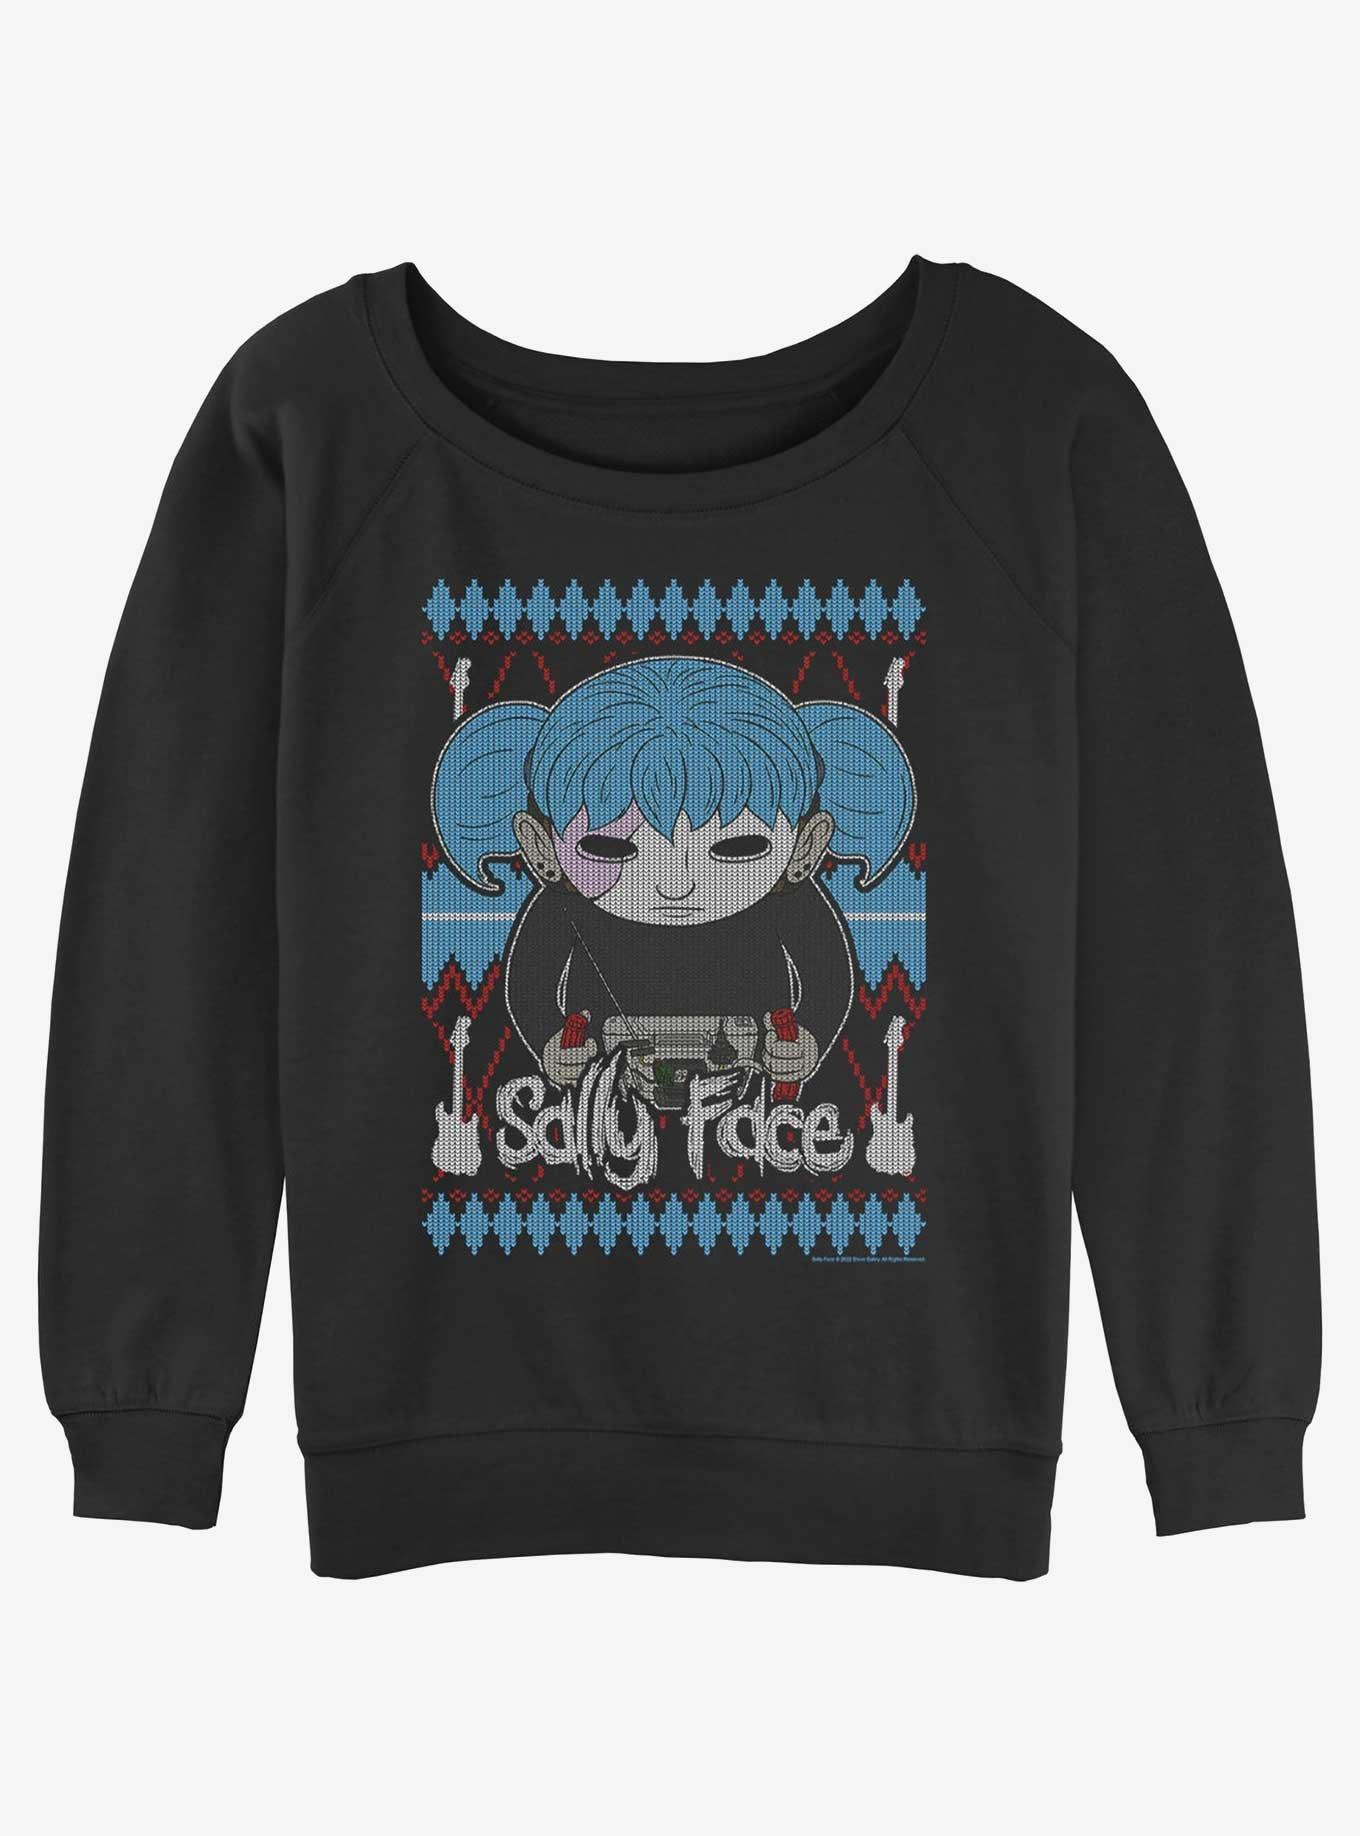 Sally Face Ugly Sweater Womens Slouchy Sweatshirt, BLACK, hi-res